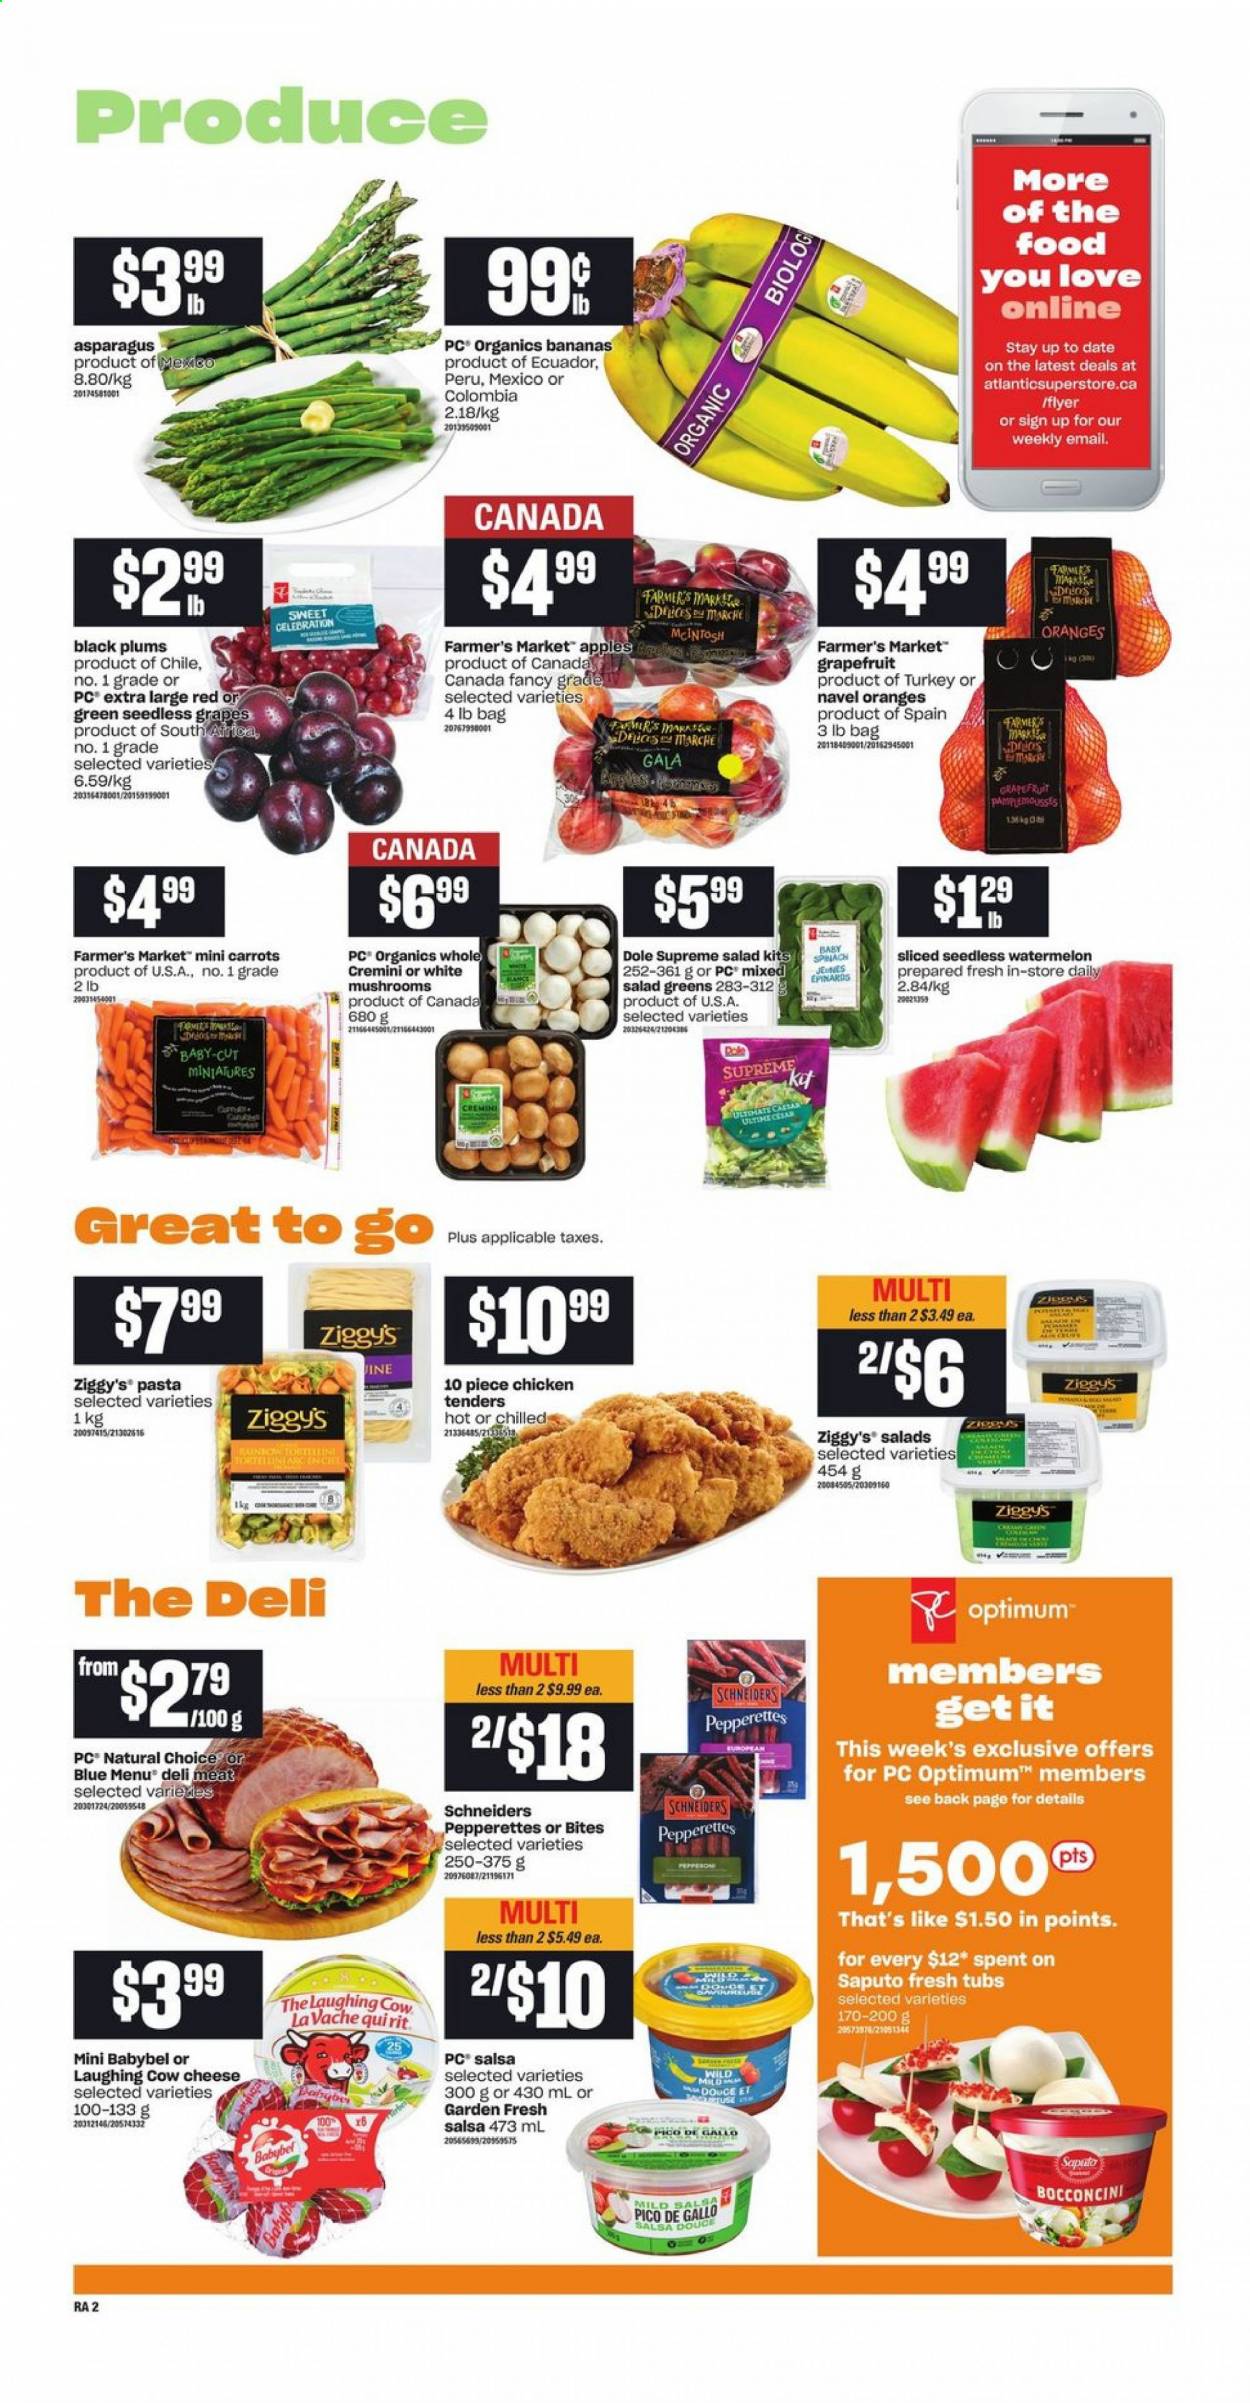 thumbnail - Atlantic Superstore Flyer - April 29, 2021 - May 05, 2021 - Sales products - mushrooms, asparagus, carrots, salad, salad greens, Dole, apples, bananas, Gala, grapefruits, grapes, seedless grapes, watermelon, plums, black plums, navel oranges, pasta, bocconcini, cheese, The Laughing Cow, Babybel, Celebration, salsa, chicken tenders, bag, Optimum. Page 3.